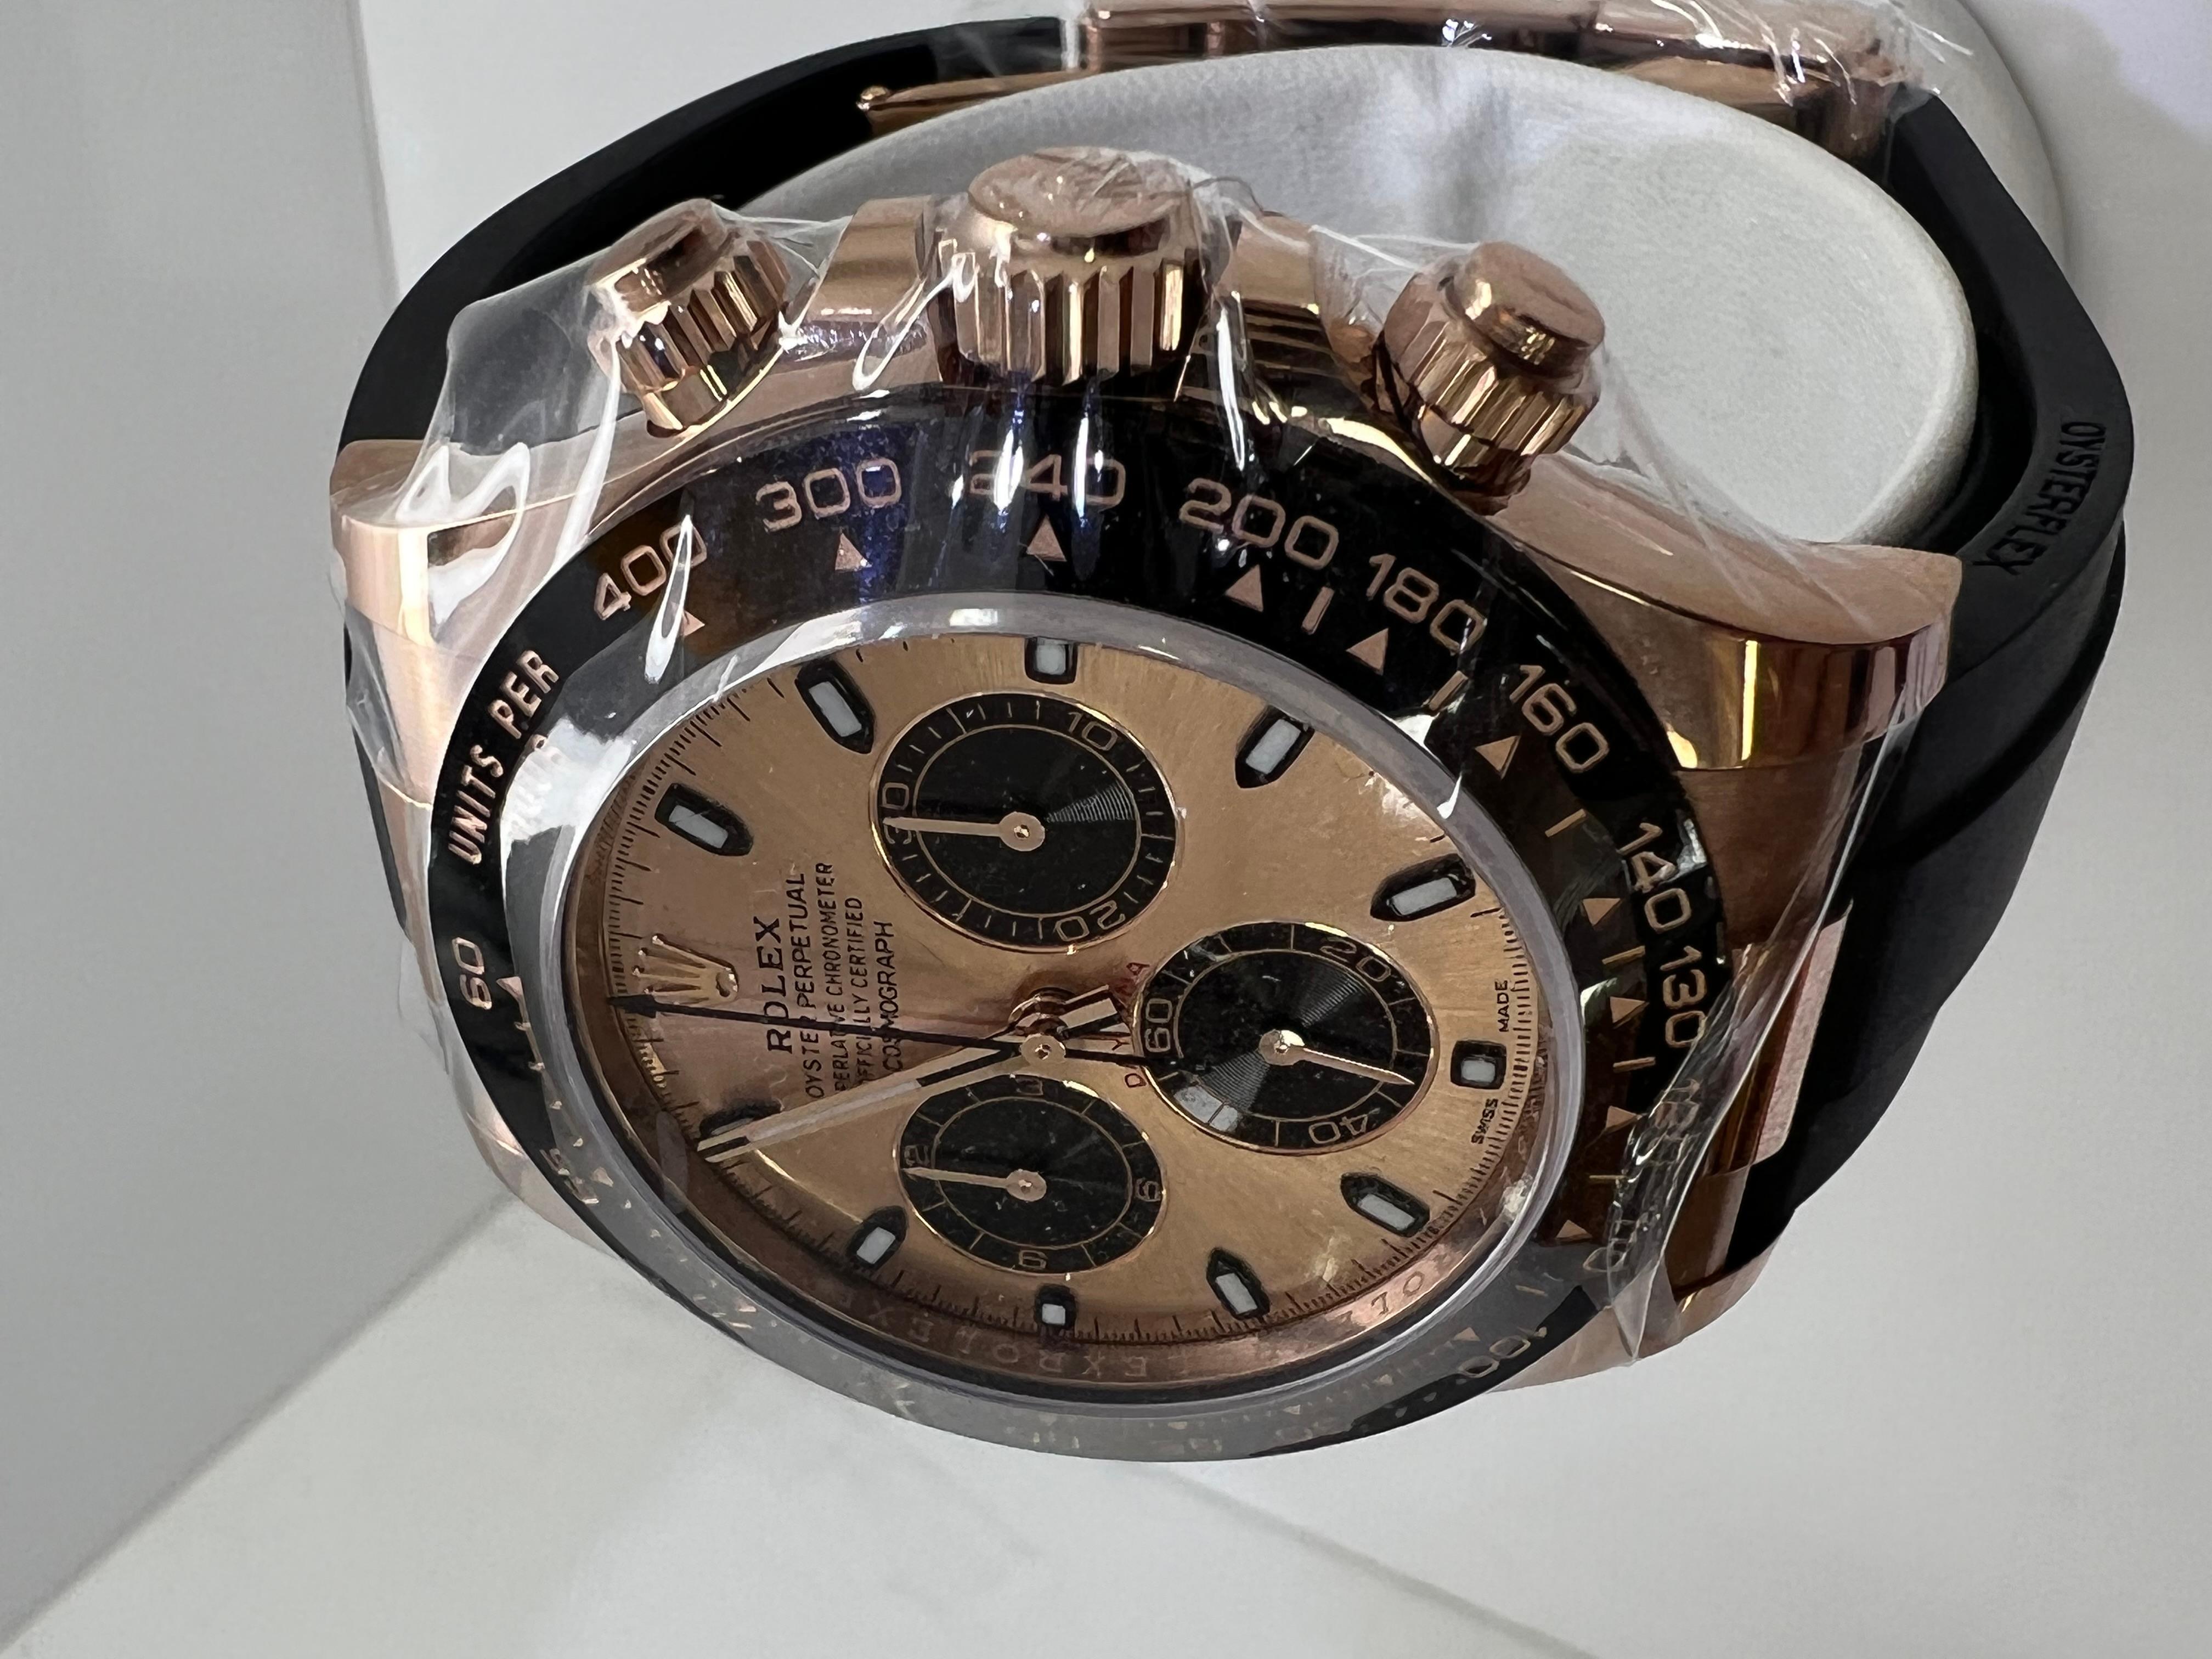 Rolex Daytona Rose Gold Sundust Dial Brand New Men's Watch 

excellent condition

This watch is 100% all original Rolex

Original Rolex Box & Papers 

Shop With Confidence 

5 Year Warranty

